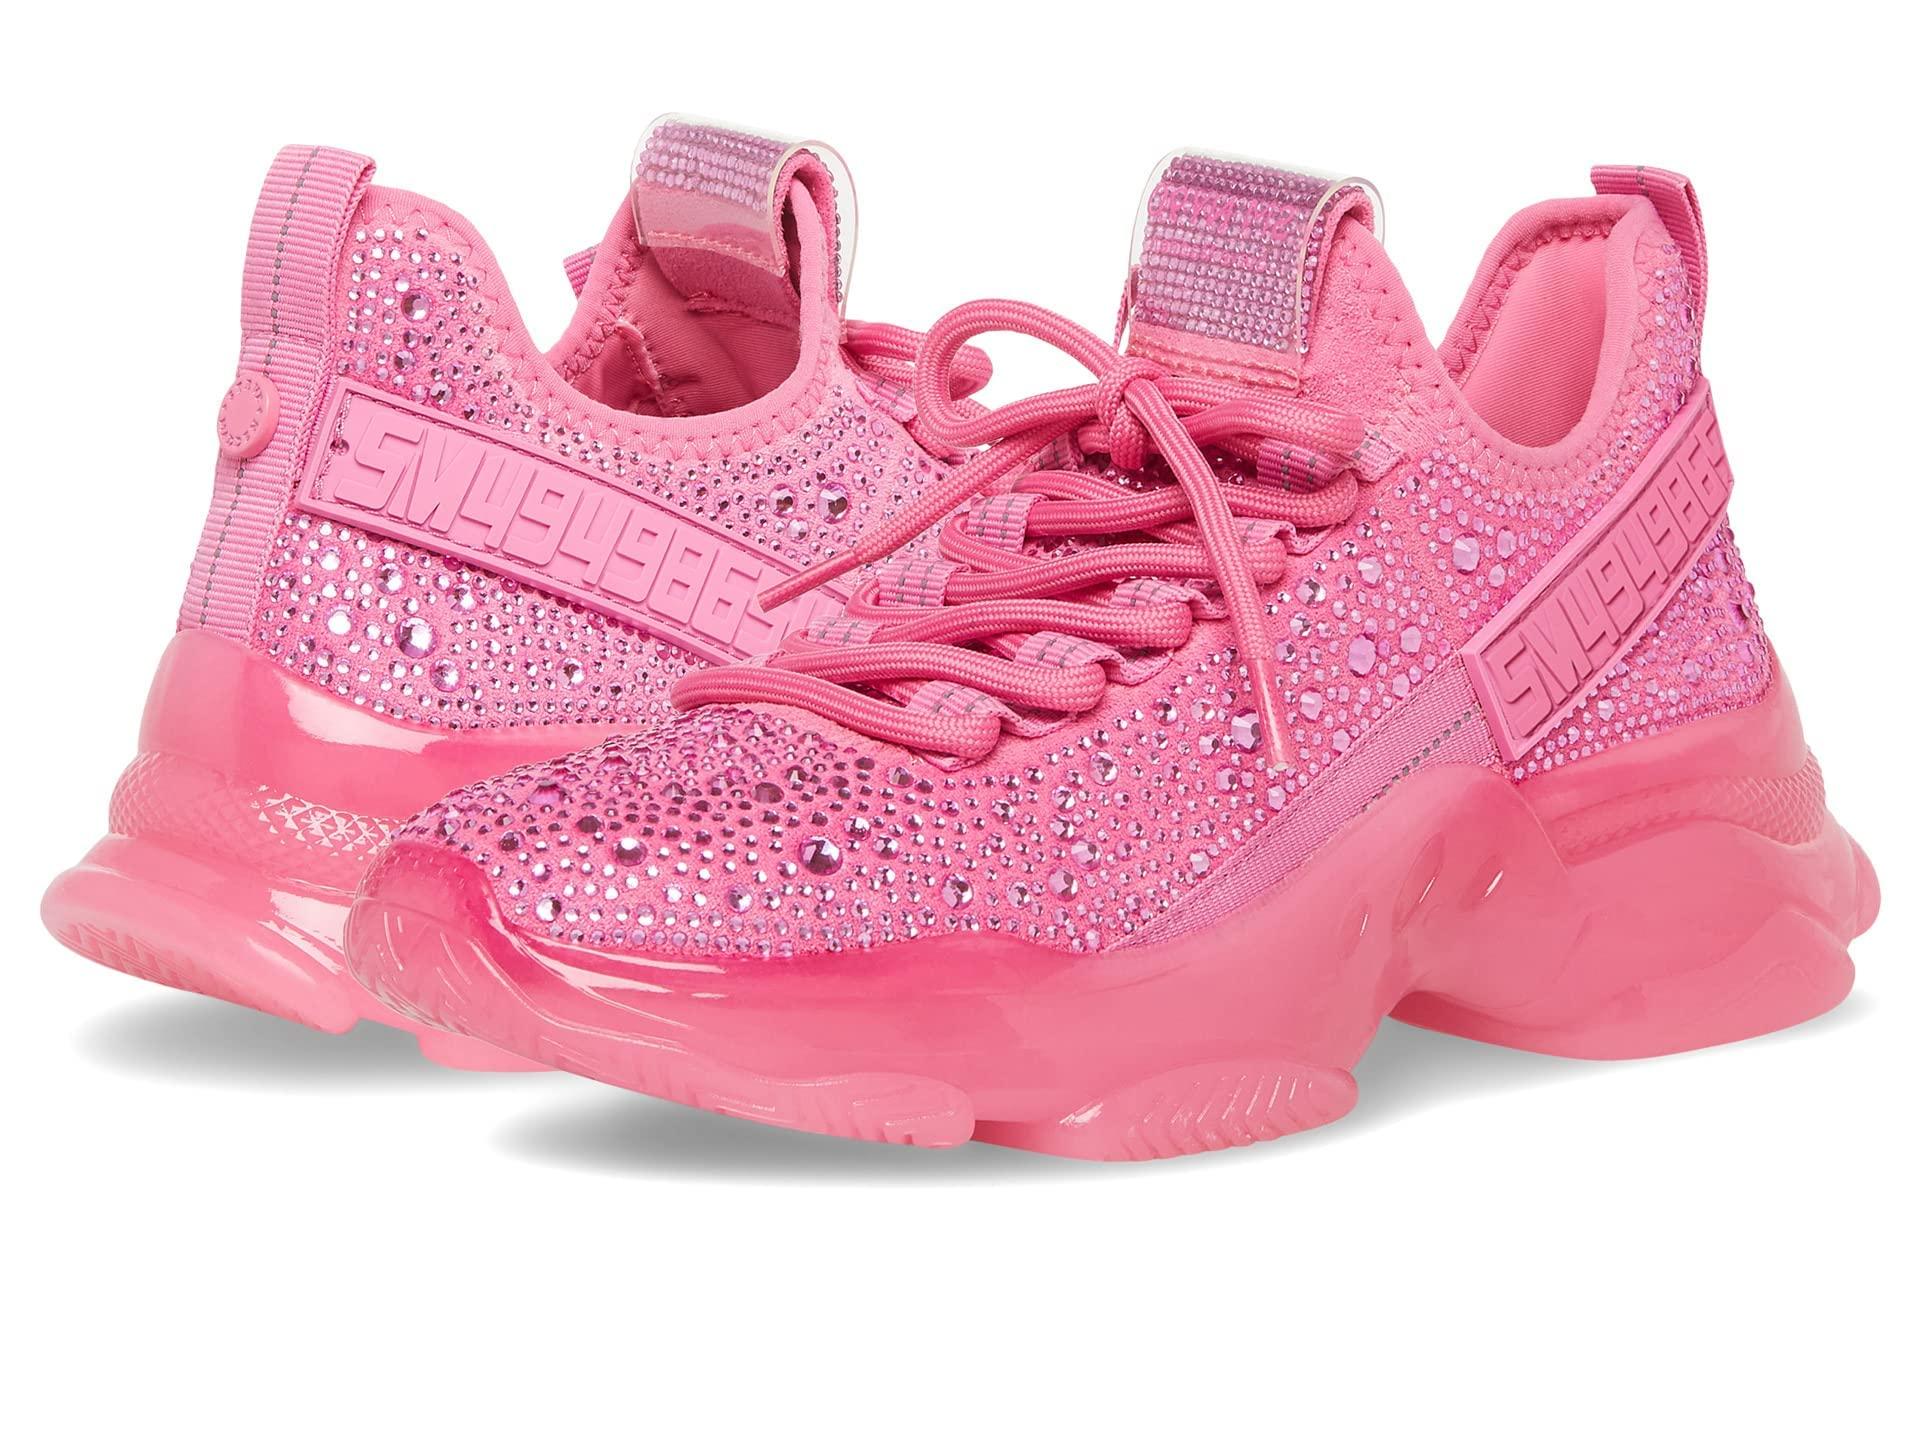 trainer pink shoes